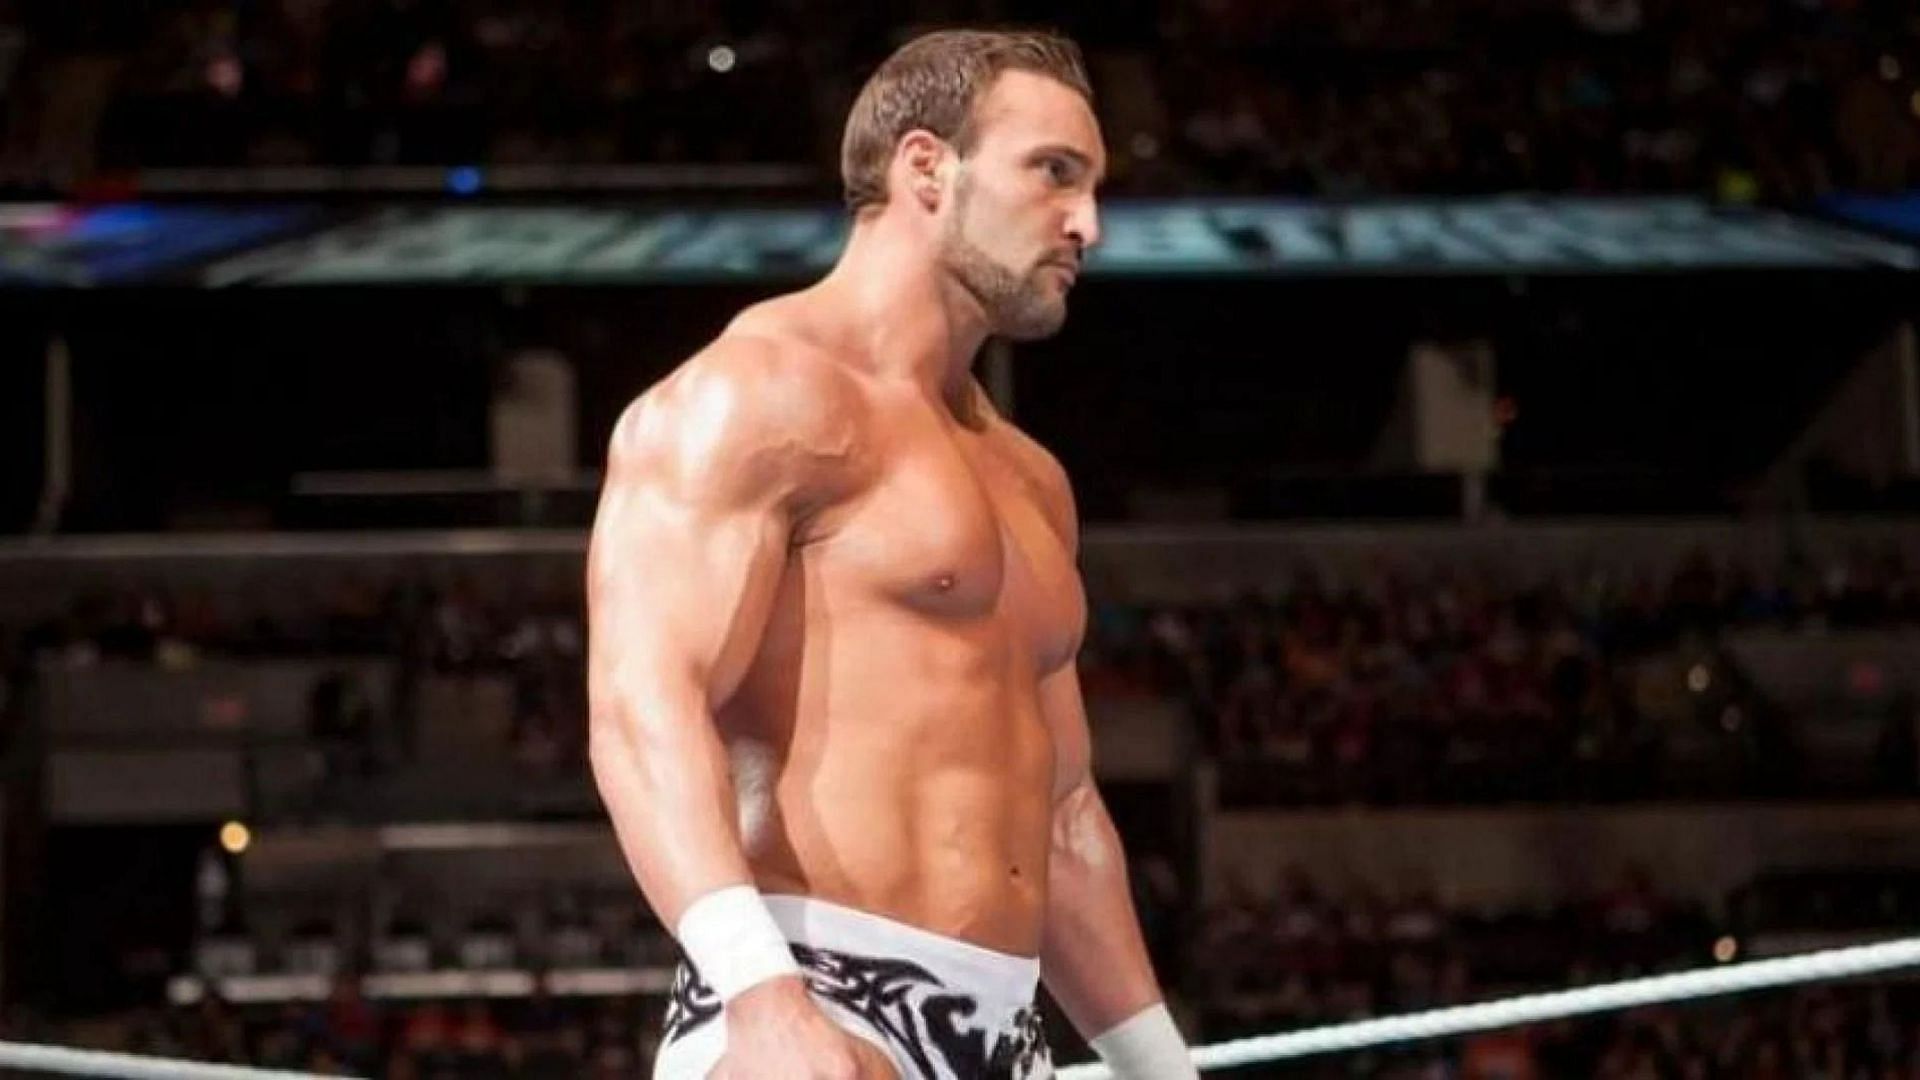 Former WWE stars Chris Masters and Rene Dupree did not initially get along